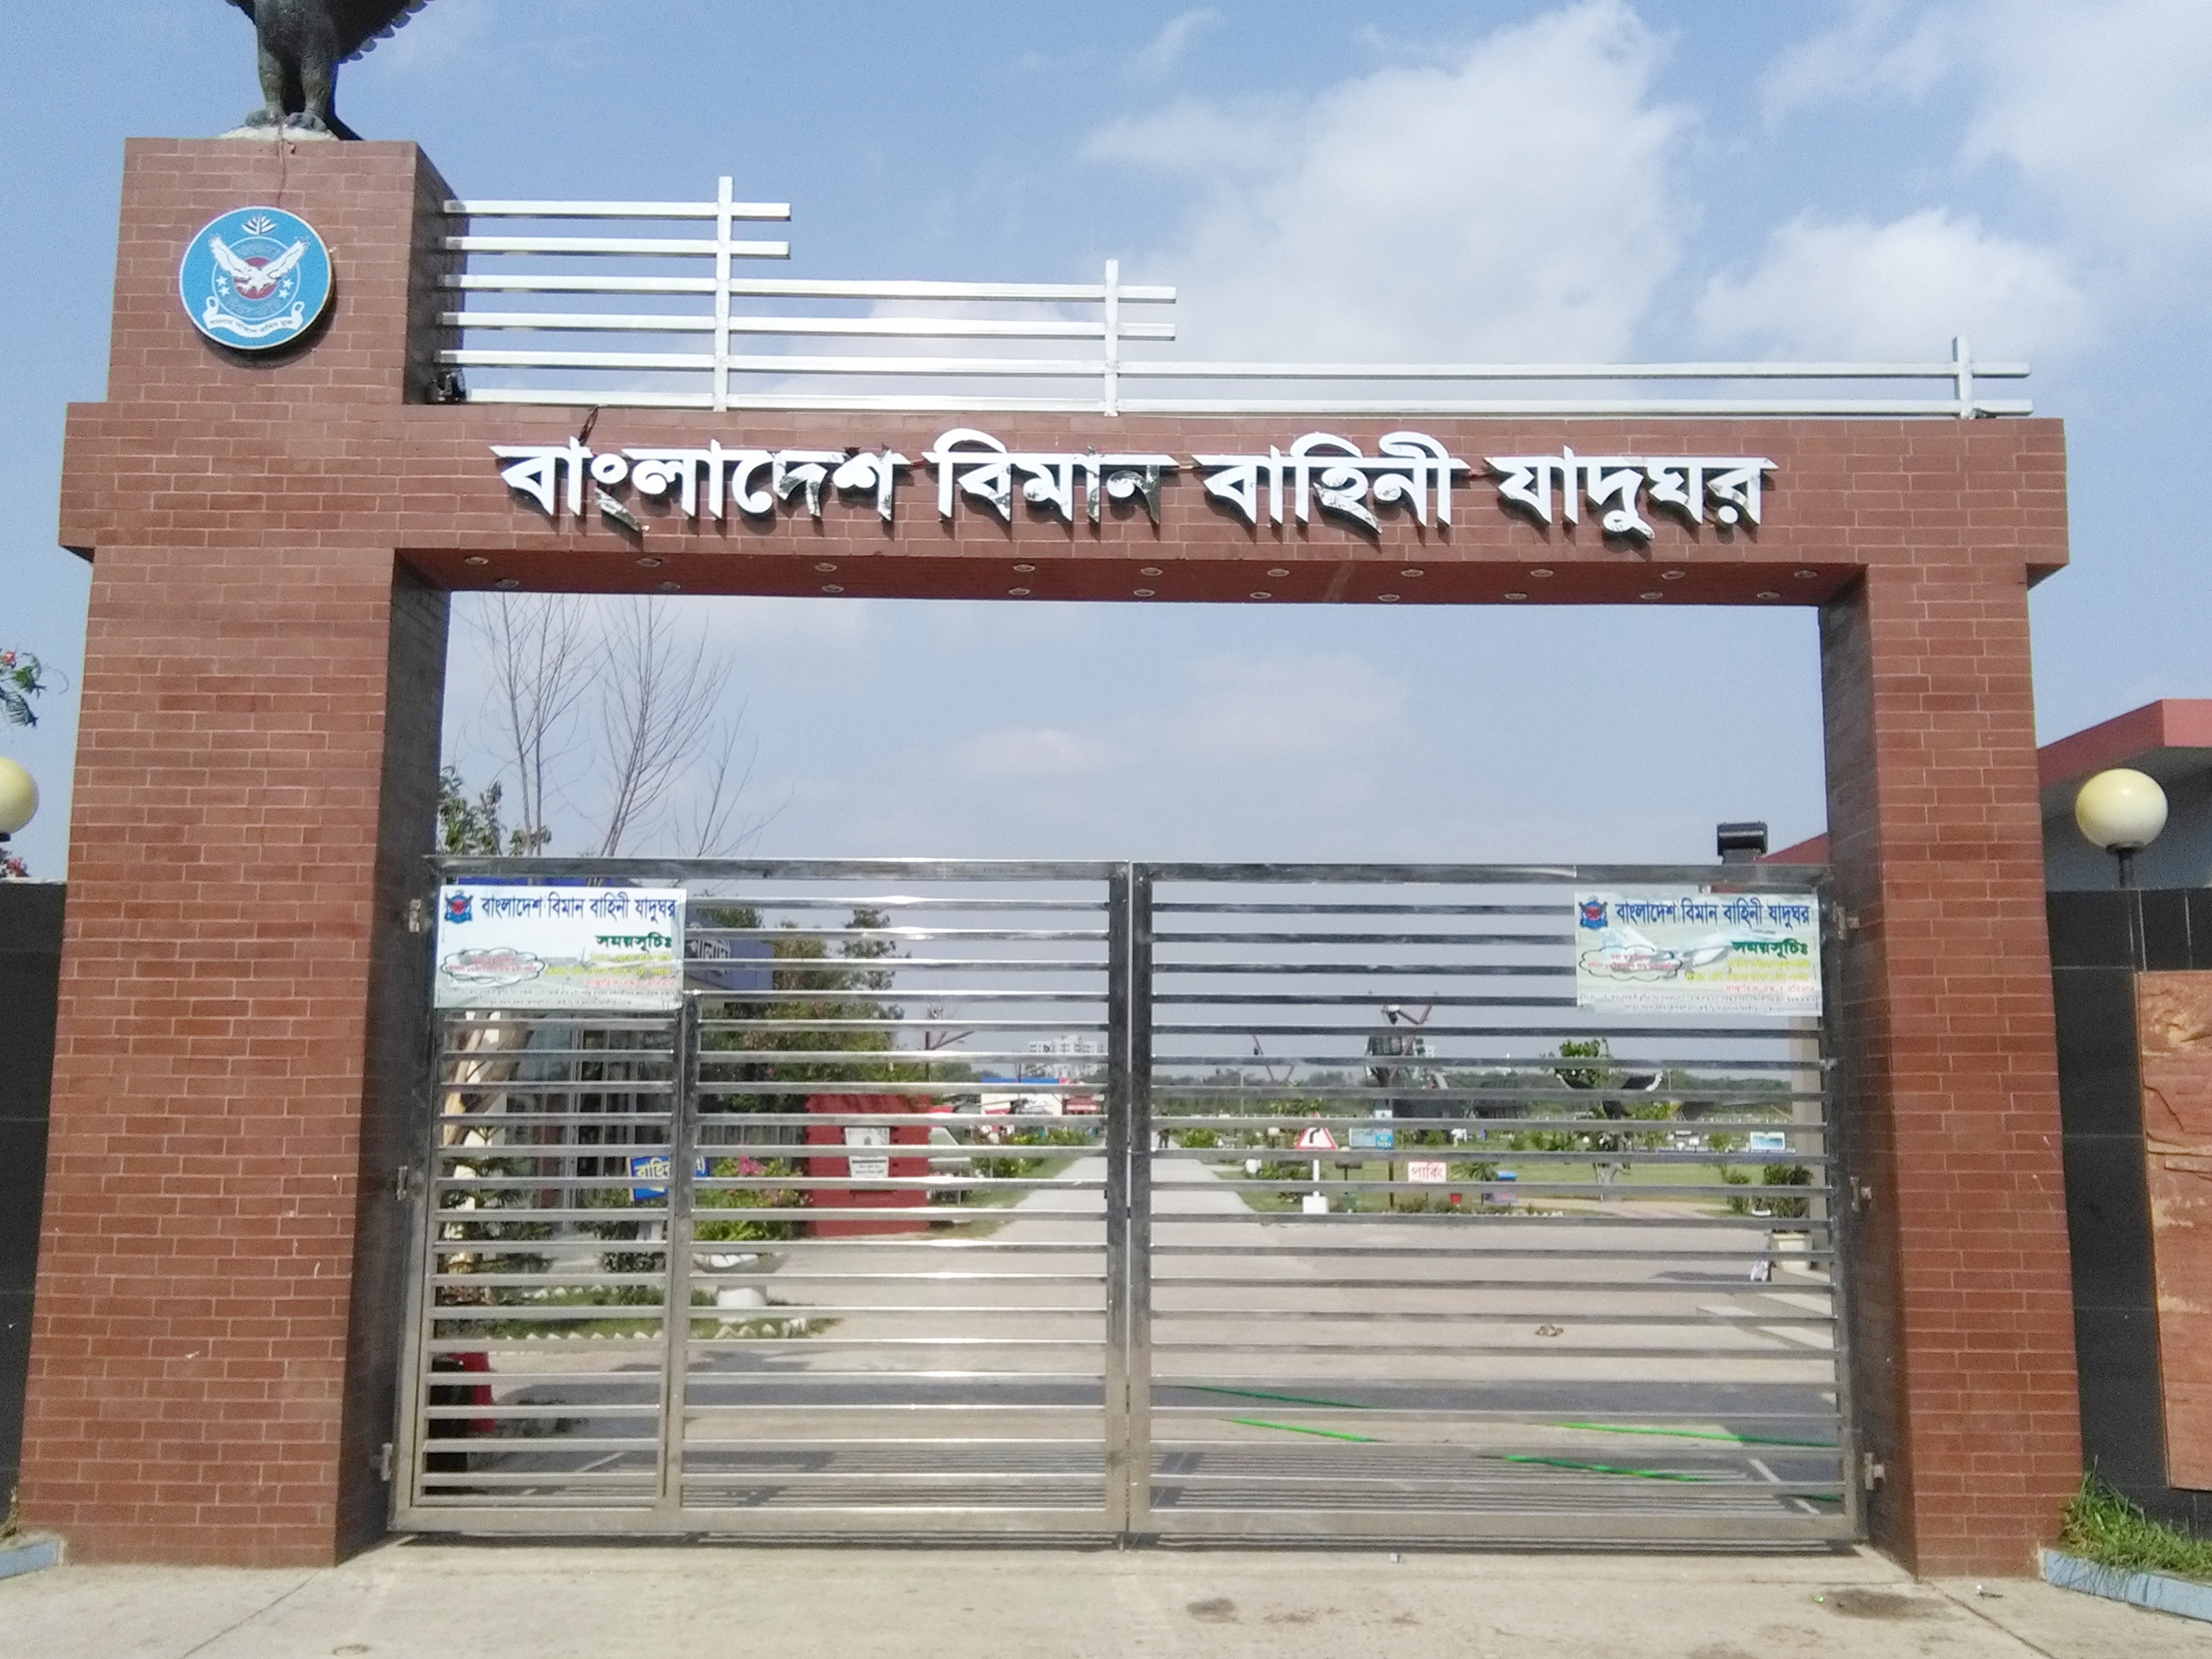 File:Entry gate of Bangladesh Air Force Museum.jpg - Wikimedia Commons